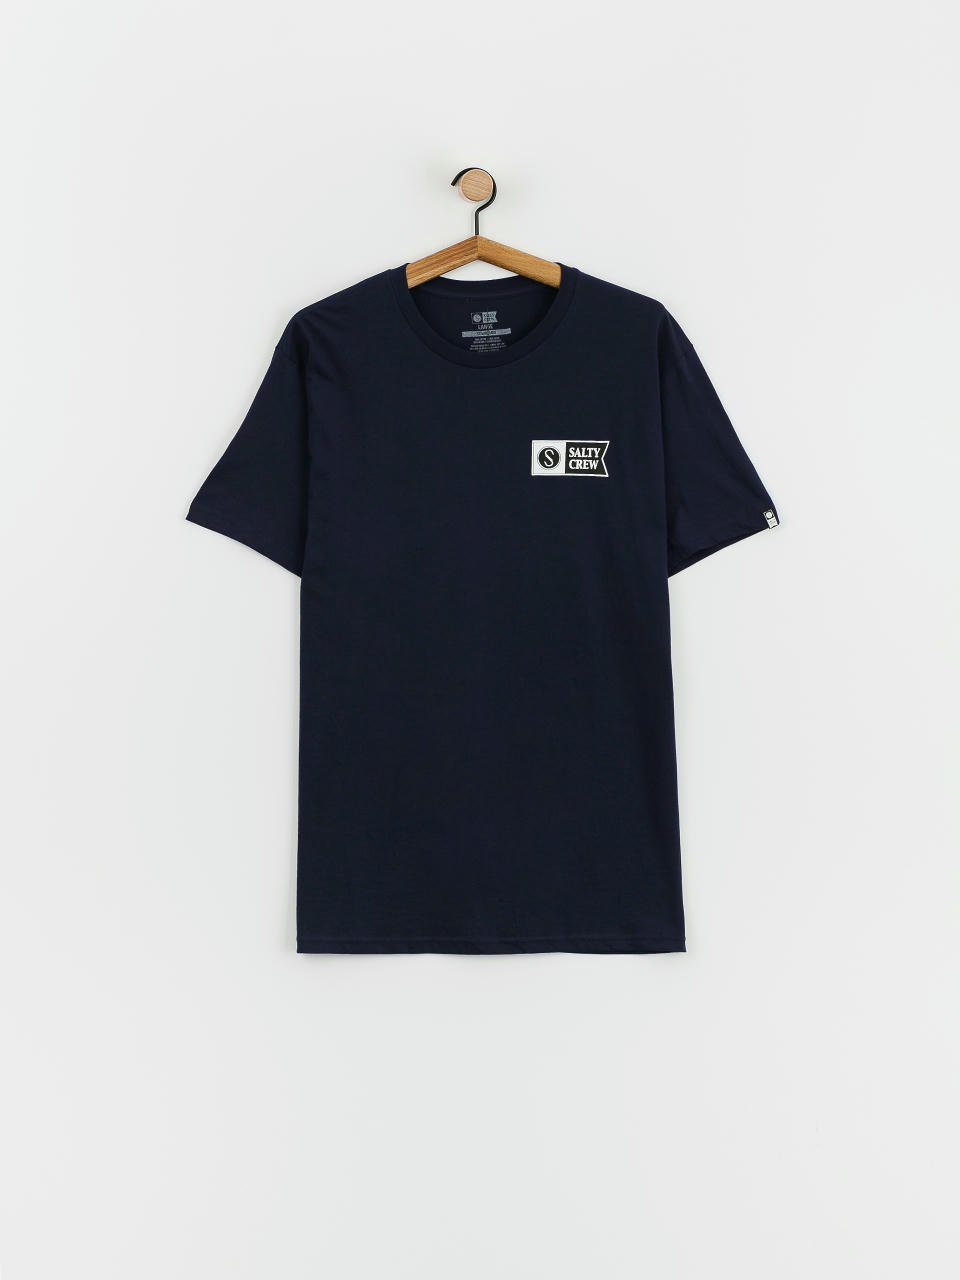 Salty Crew Tailed T-shirt (black)